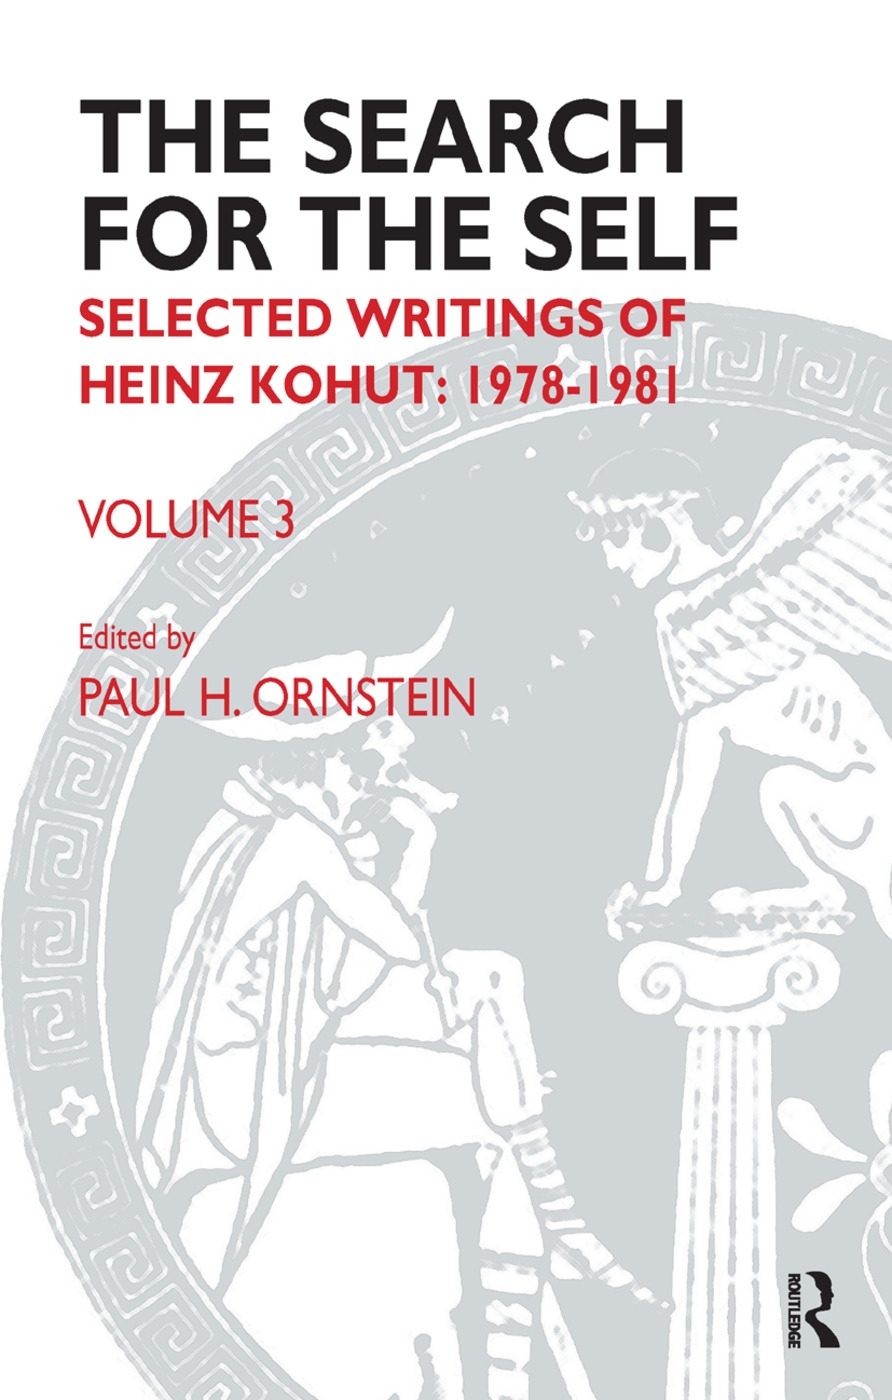 The Search for the Self: Selected Writings of Heinz Kohut: 1978-1983